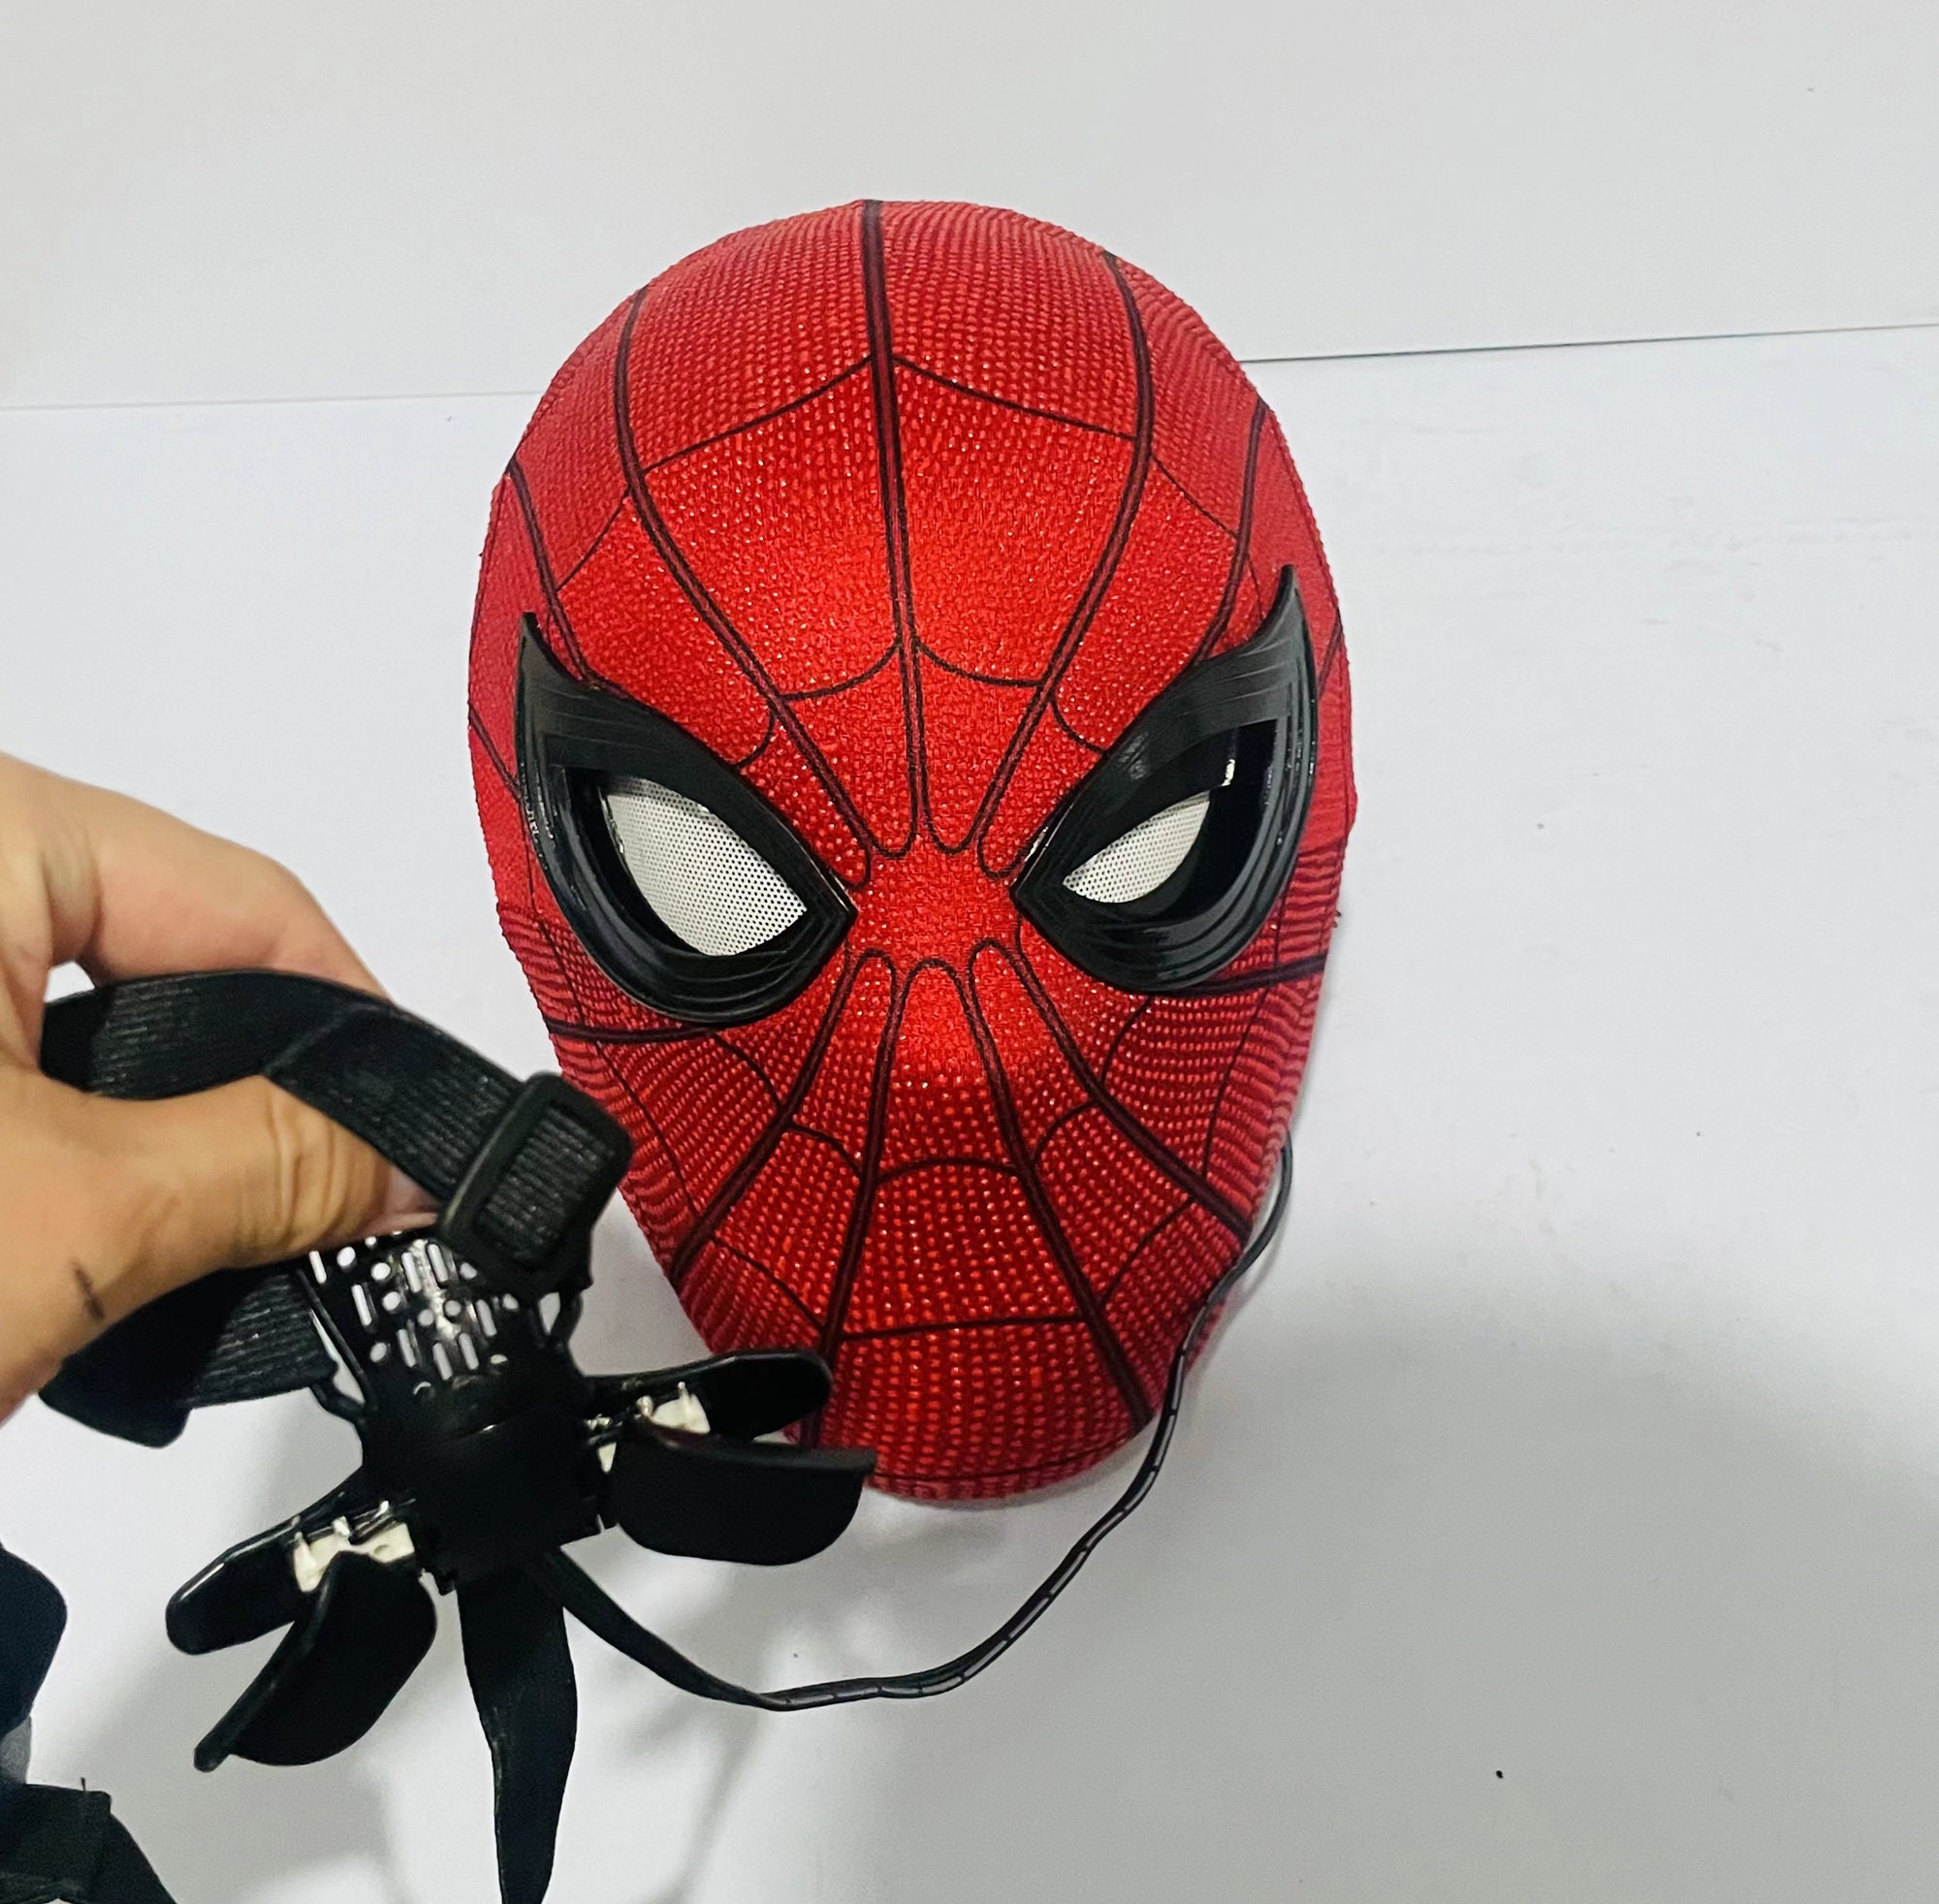  fehfuek Spider Hero Mask Movable Mechanical Eyes With Remote  Control Spider Super Hero Full Mask Moving Lenses Cosplay Wearable Prop Mask  Homecoming Mask Man For Halloween Birthday And Christmas Gift 